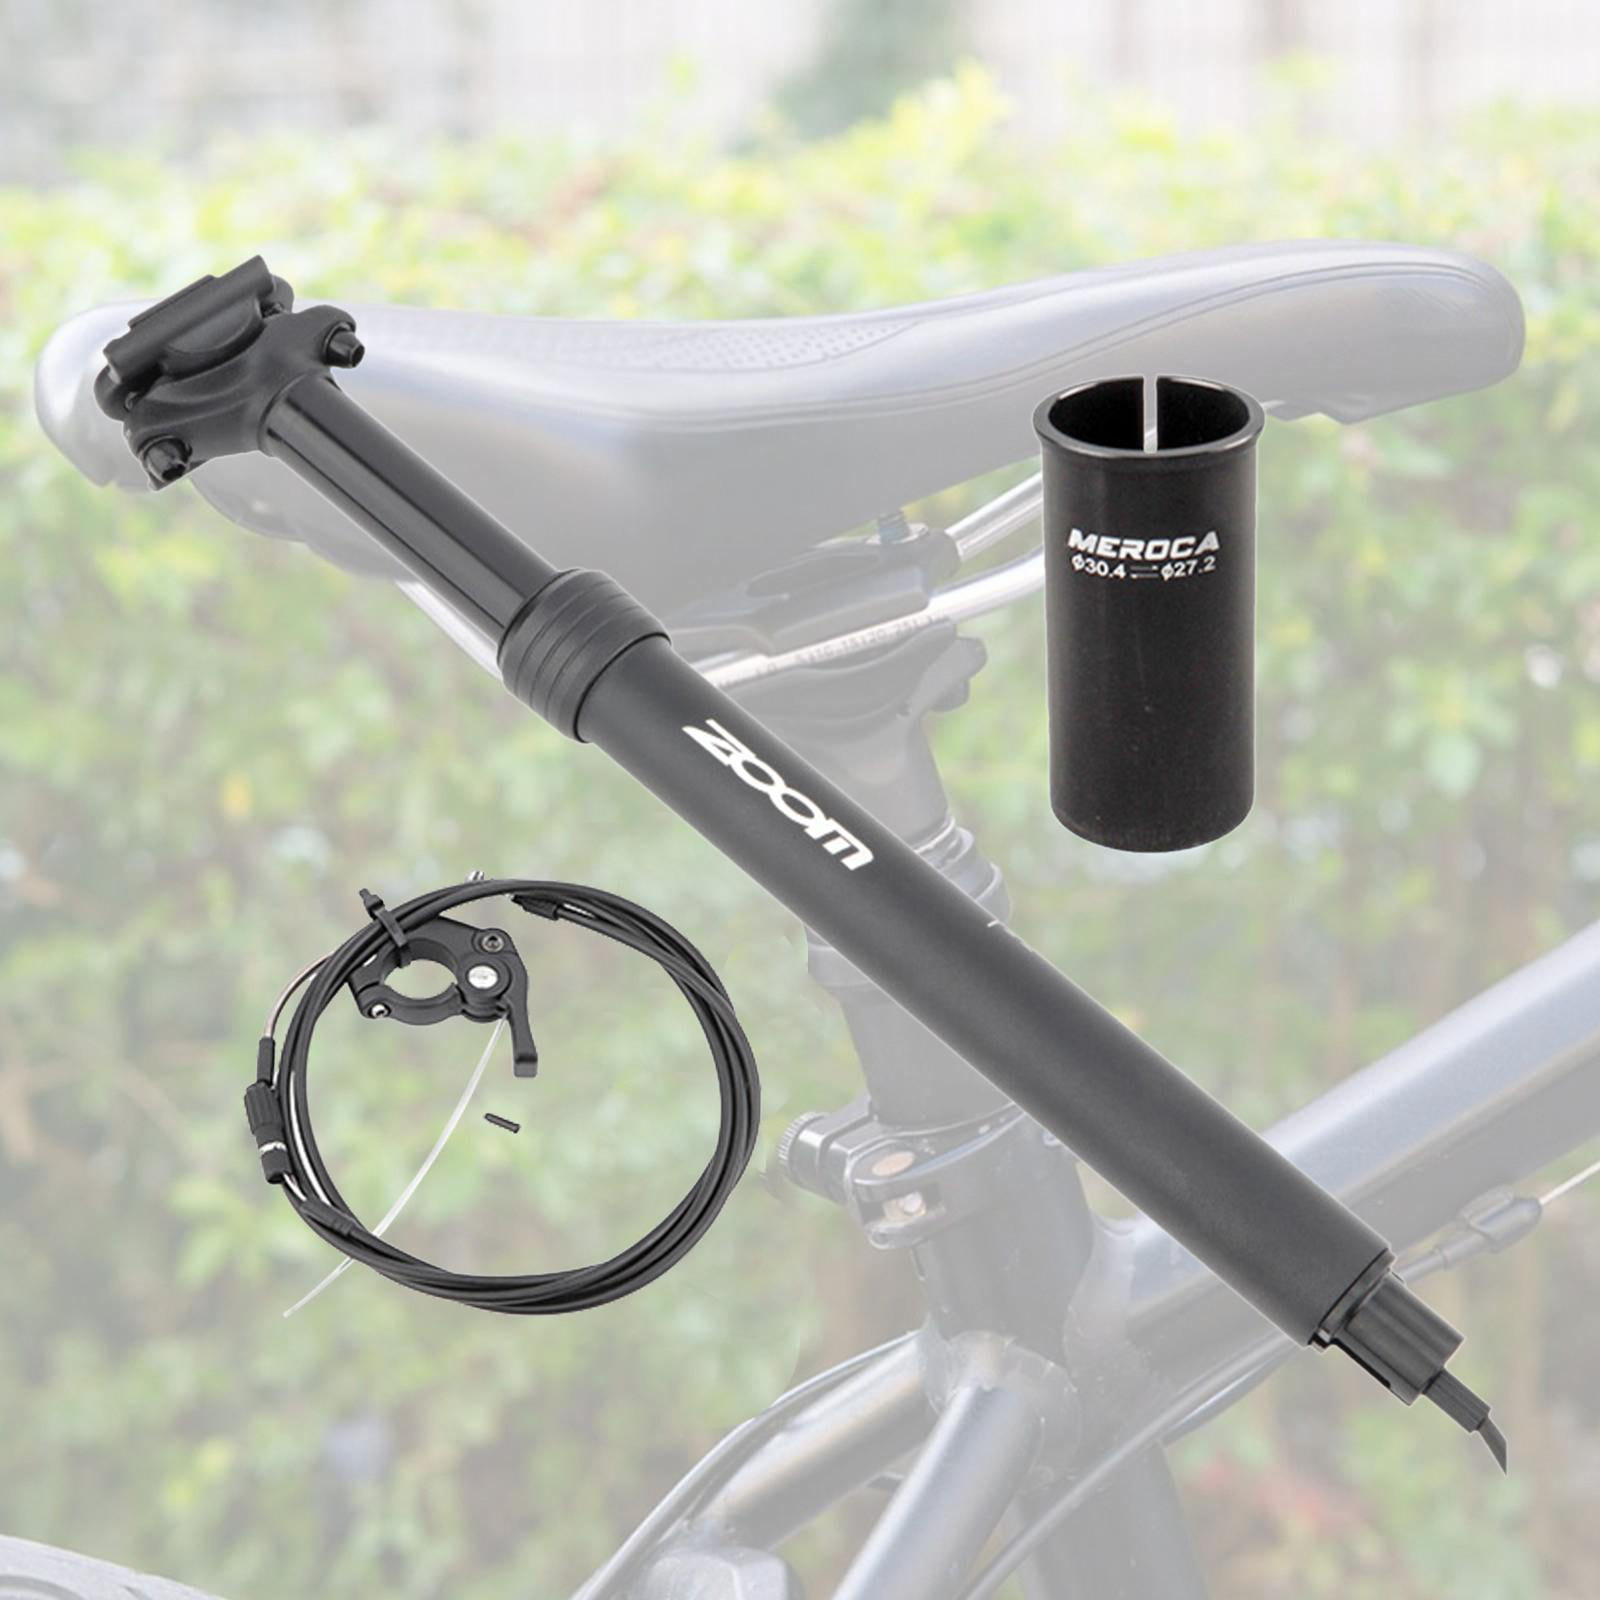 370mm Bike Adjustable Seatpost 3 Sizes Seat Post Saddle Support Tube Pillar with Clear Calibration Mount Wrench Key 